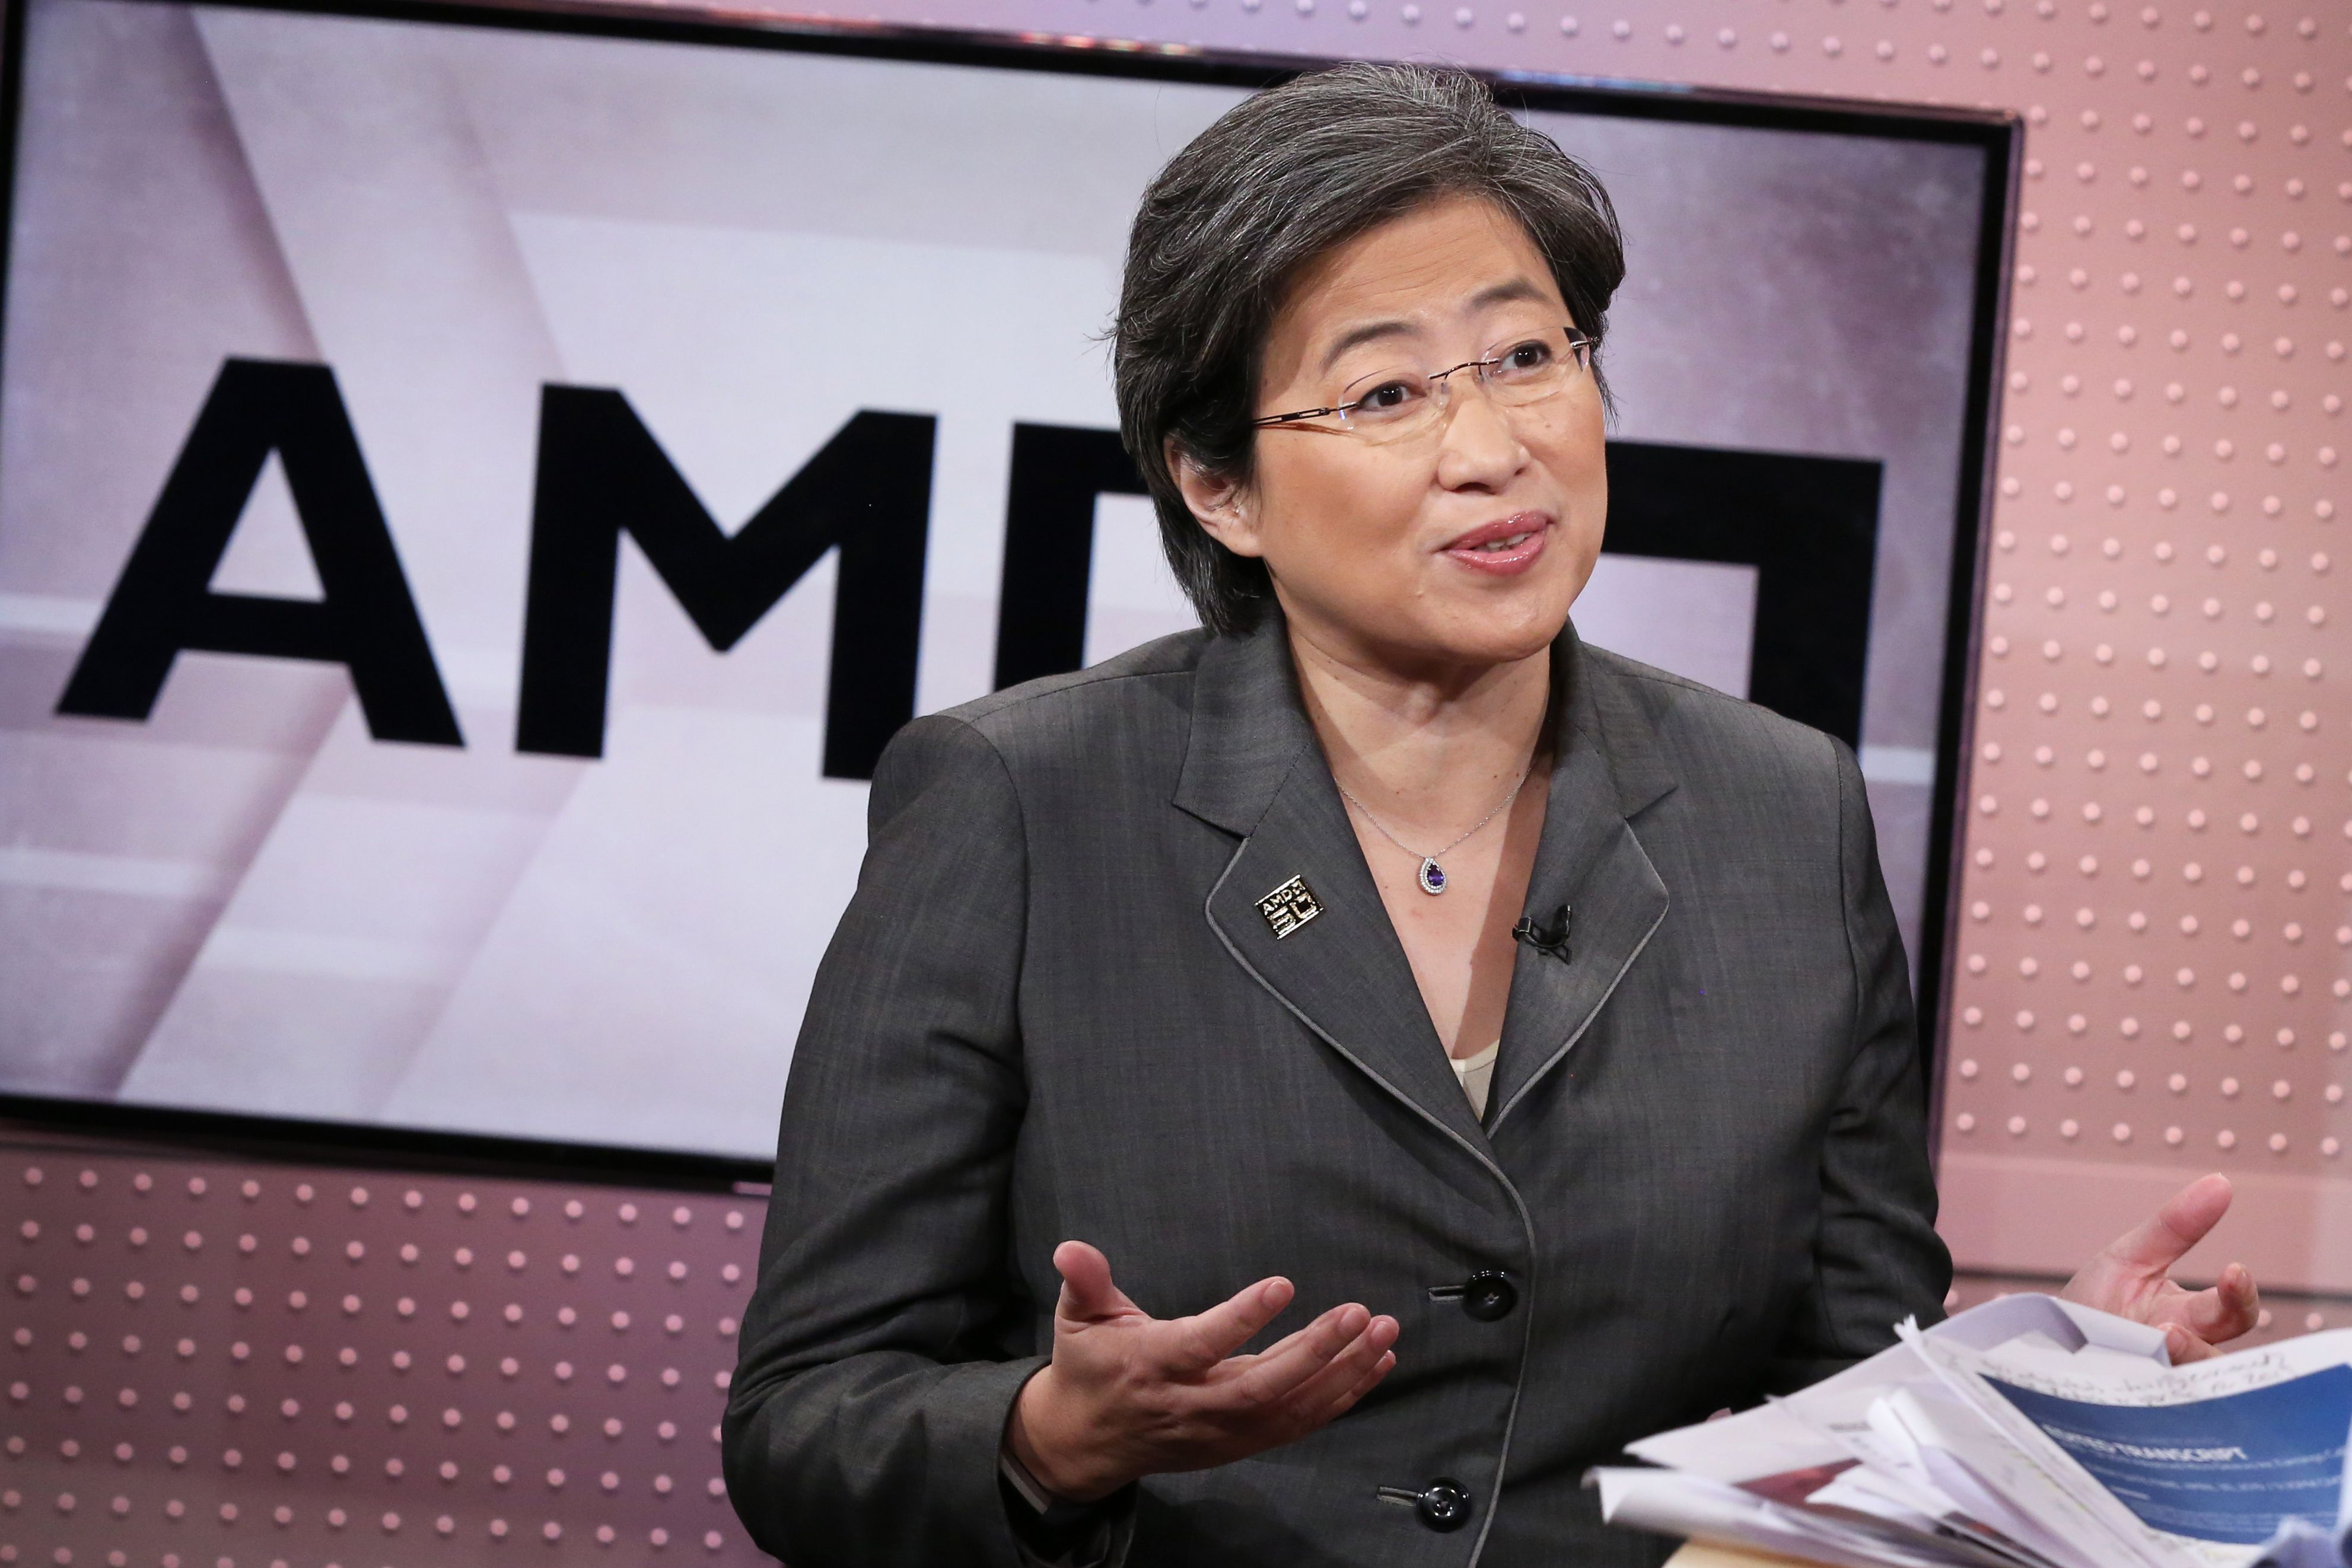 AMD jumps after upgrades lead analysts to predict gains from Intel